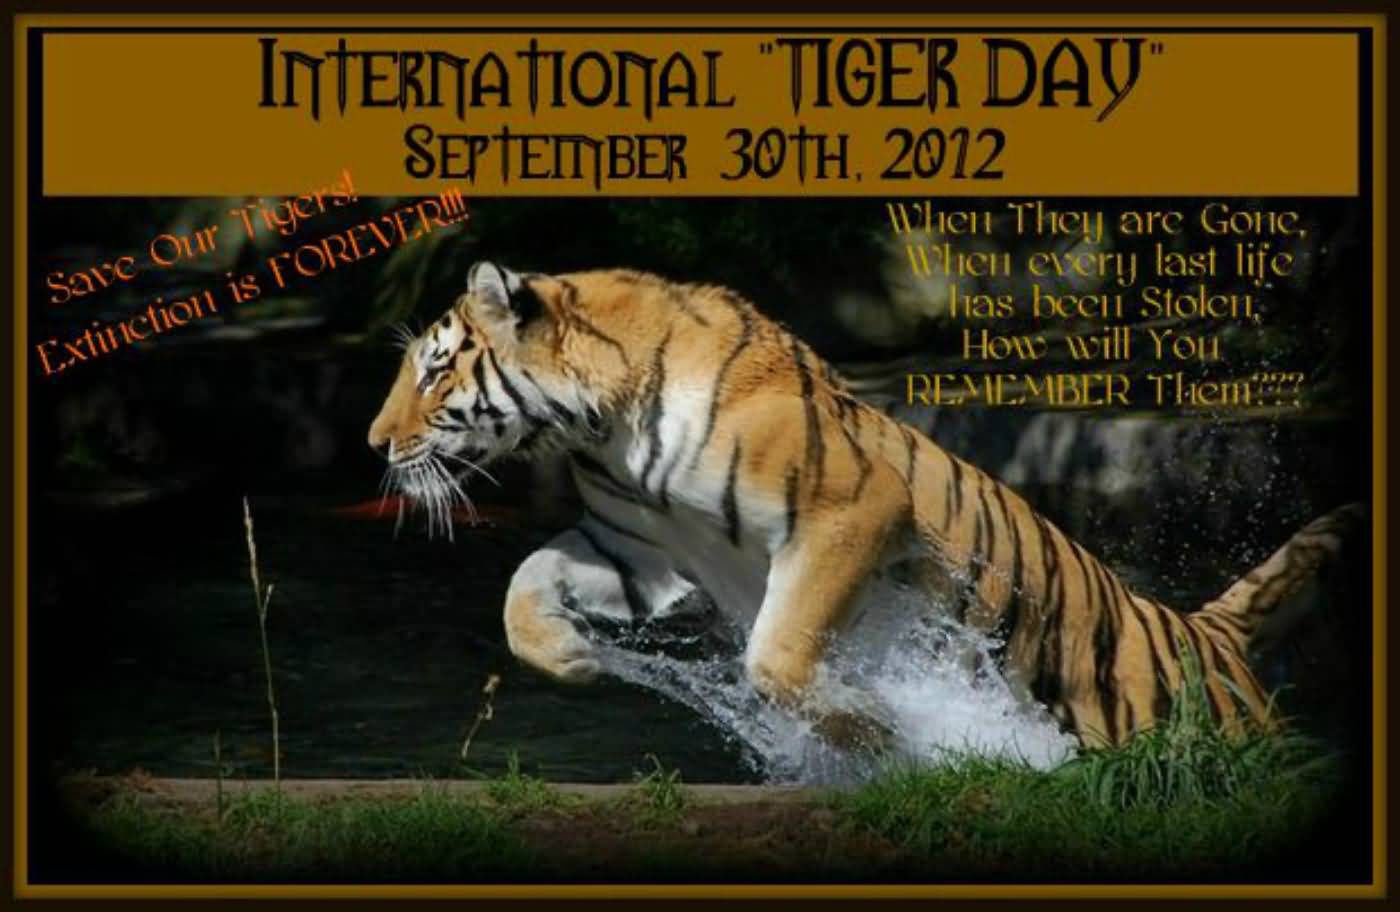 Save Our Tigers - International Tiger Day Greetings